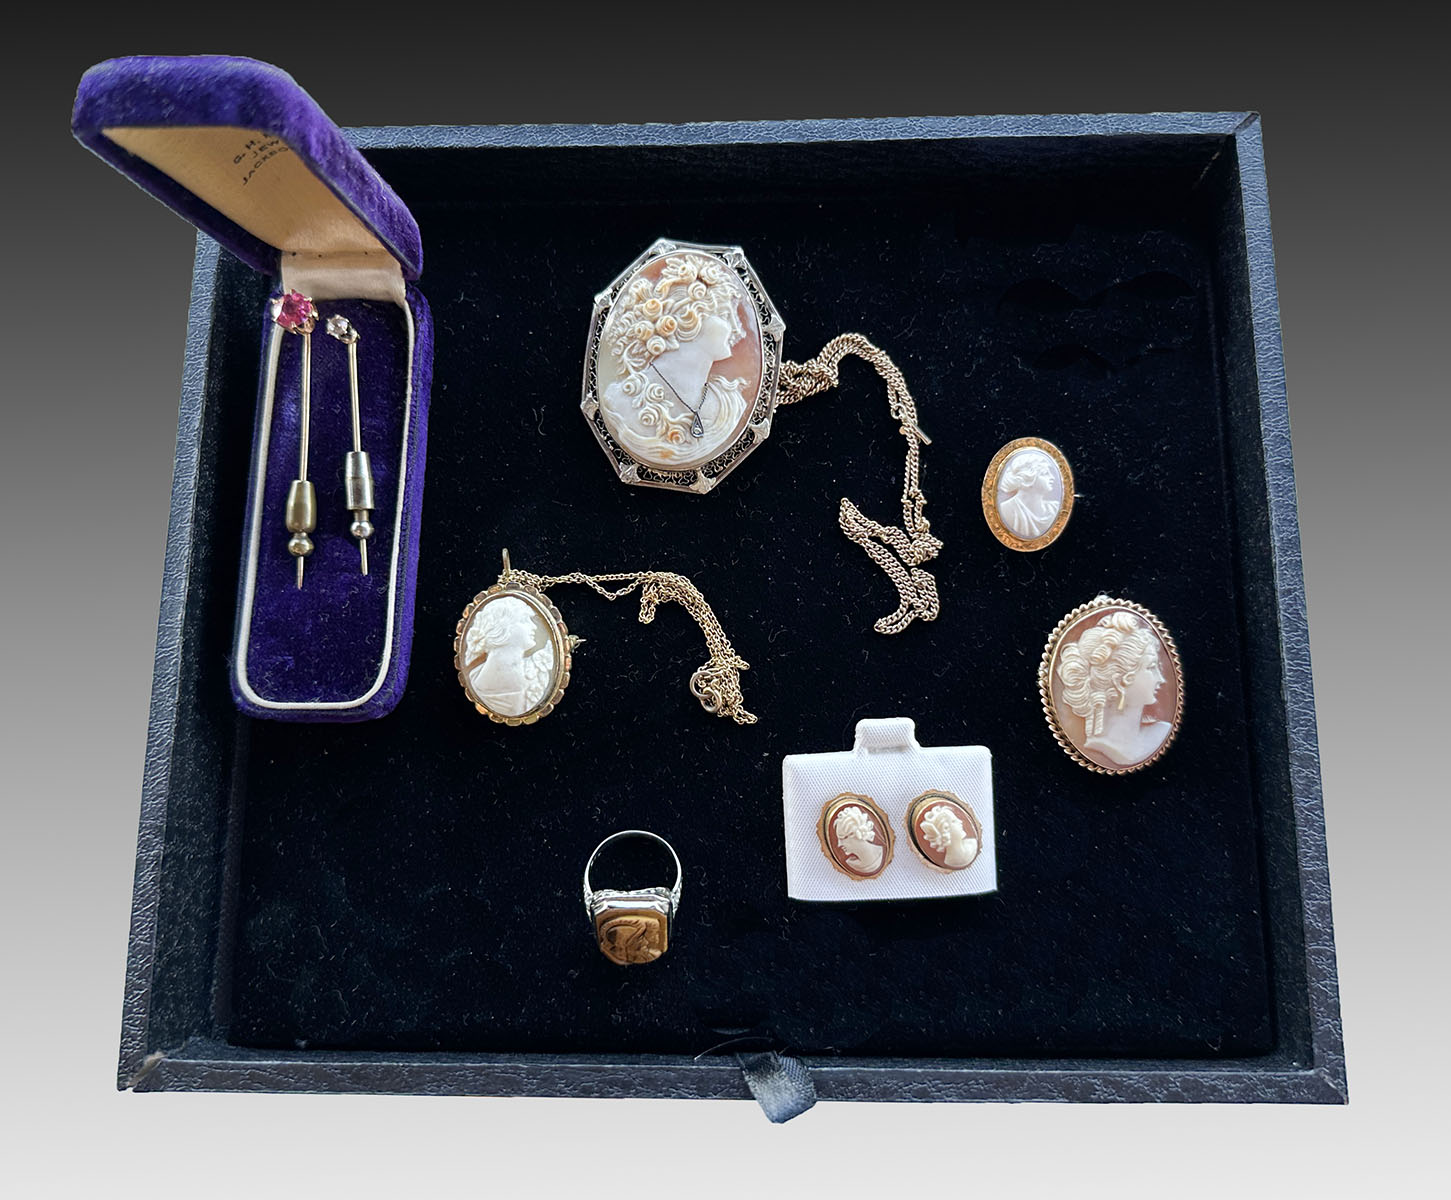 8PC GOLD CAMEO AND PIN LOT: Lot includes